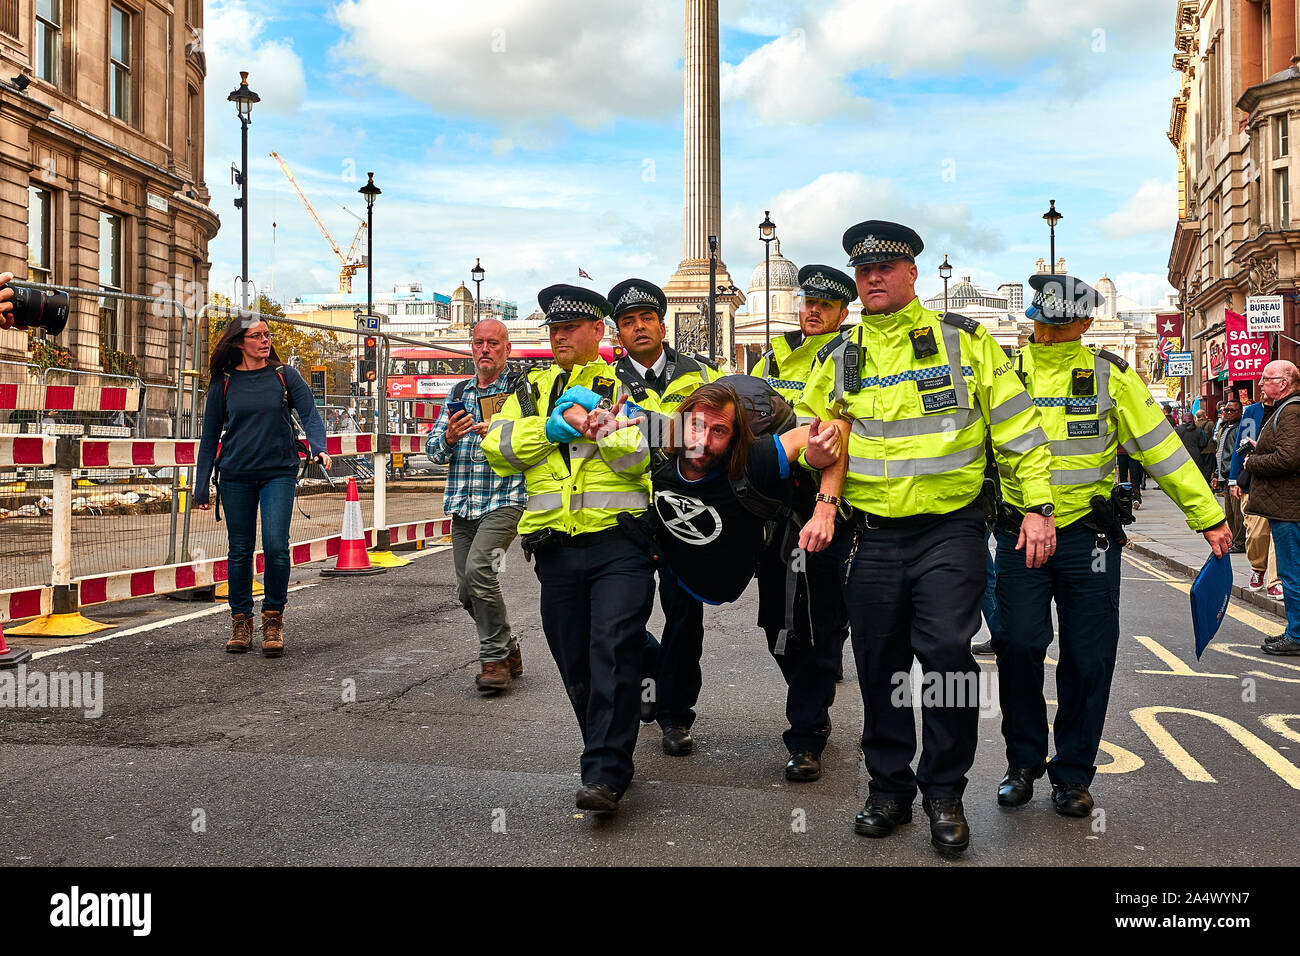 London, U.K. - Oct 16, 2019: An environmental campaigner from Extinction Rebellion is dragged away by Police after blocking a road in Trafalgar Square. Stock Photo